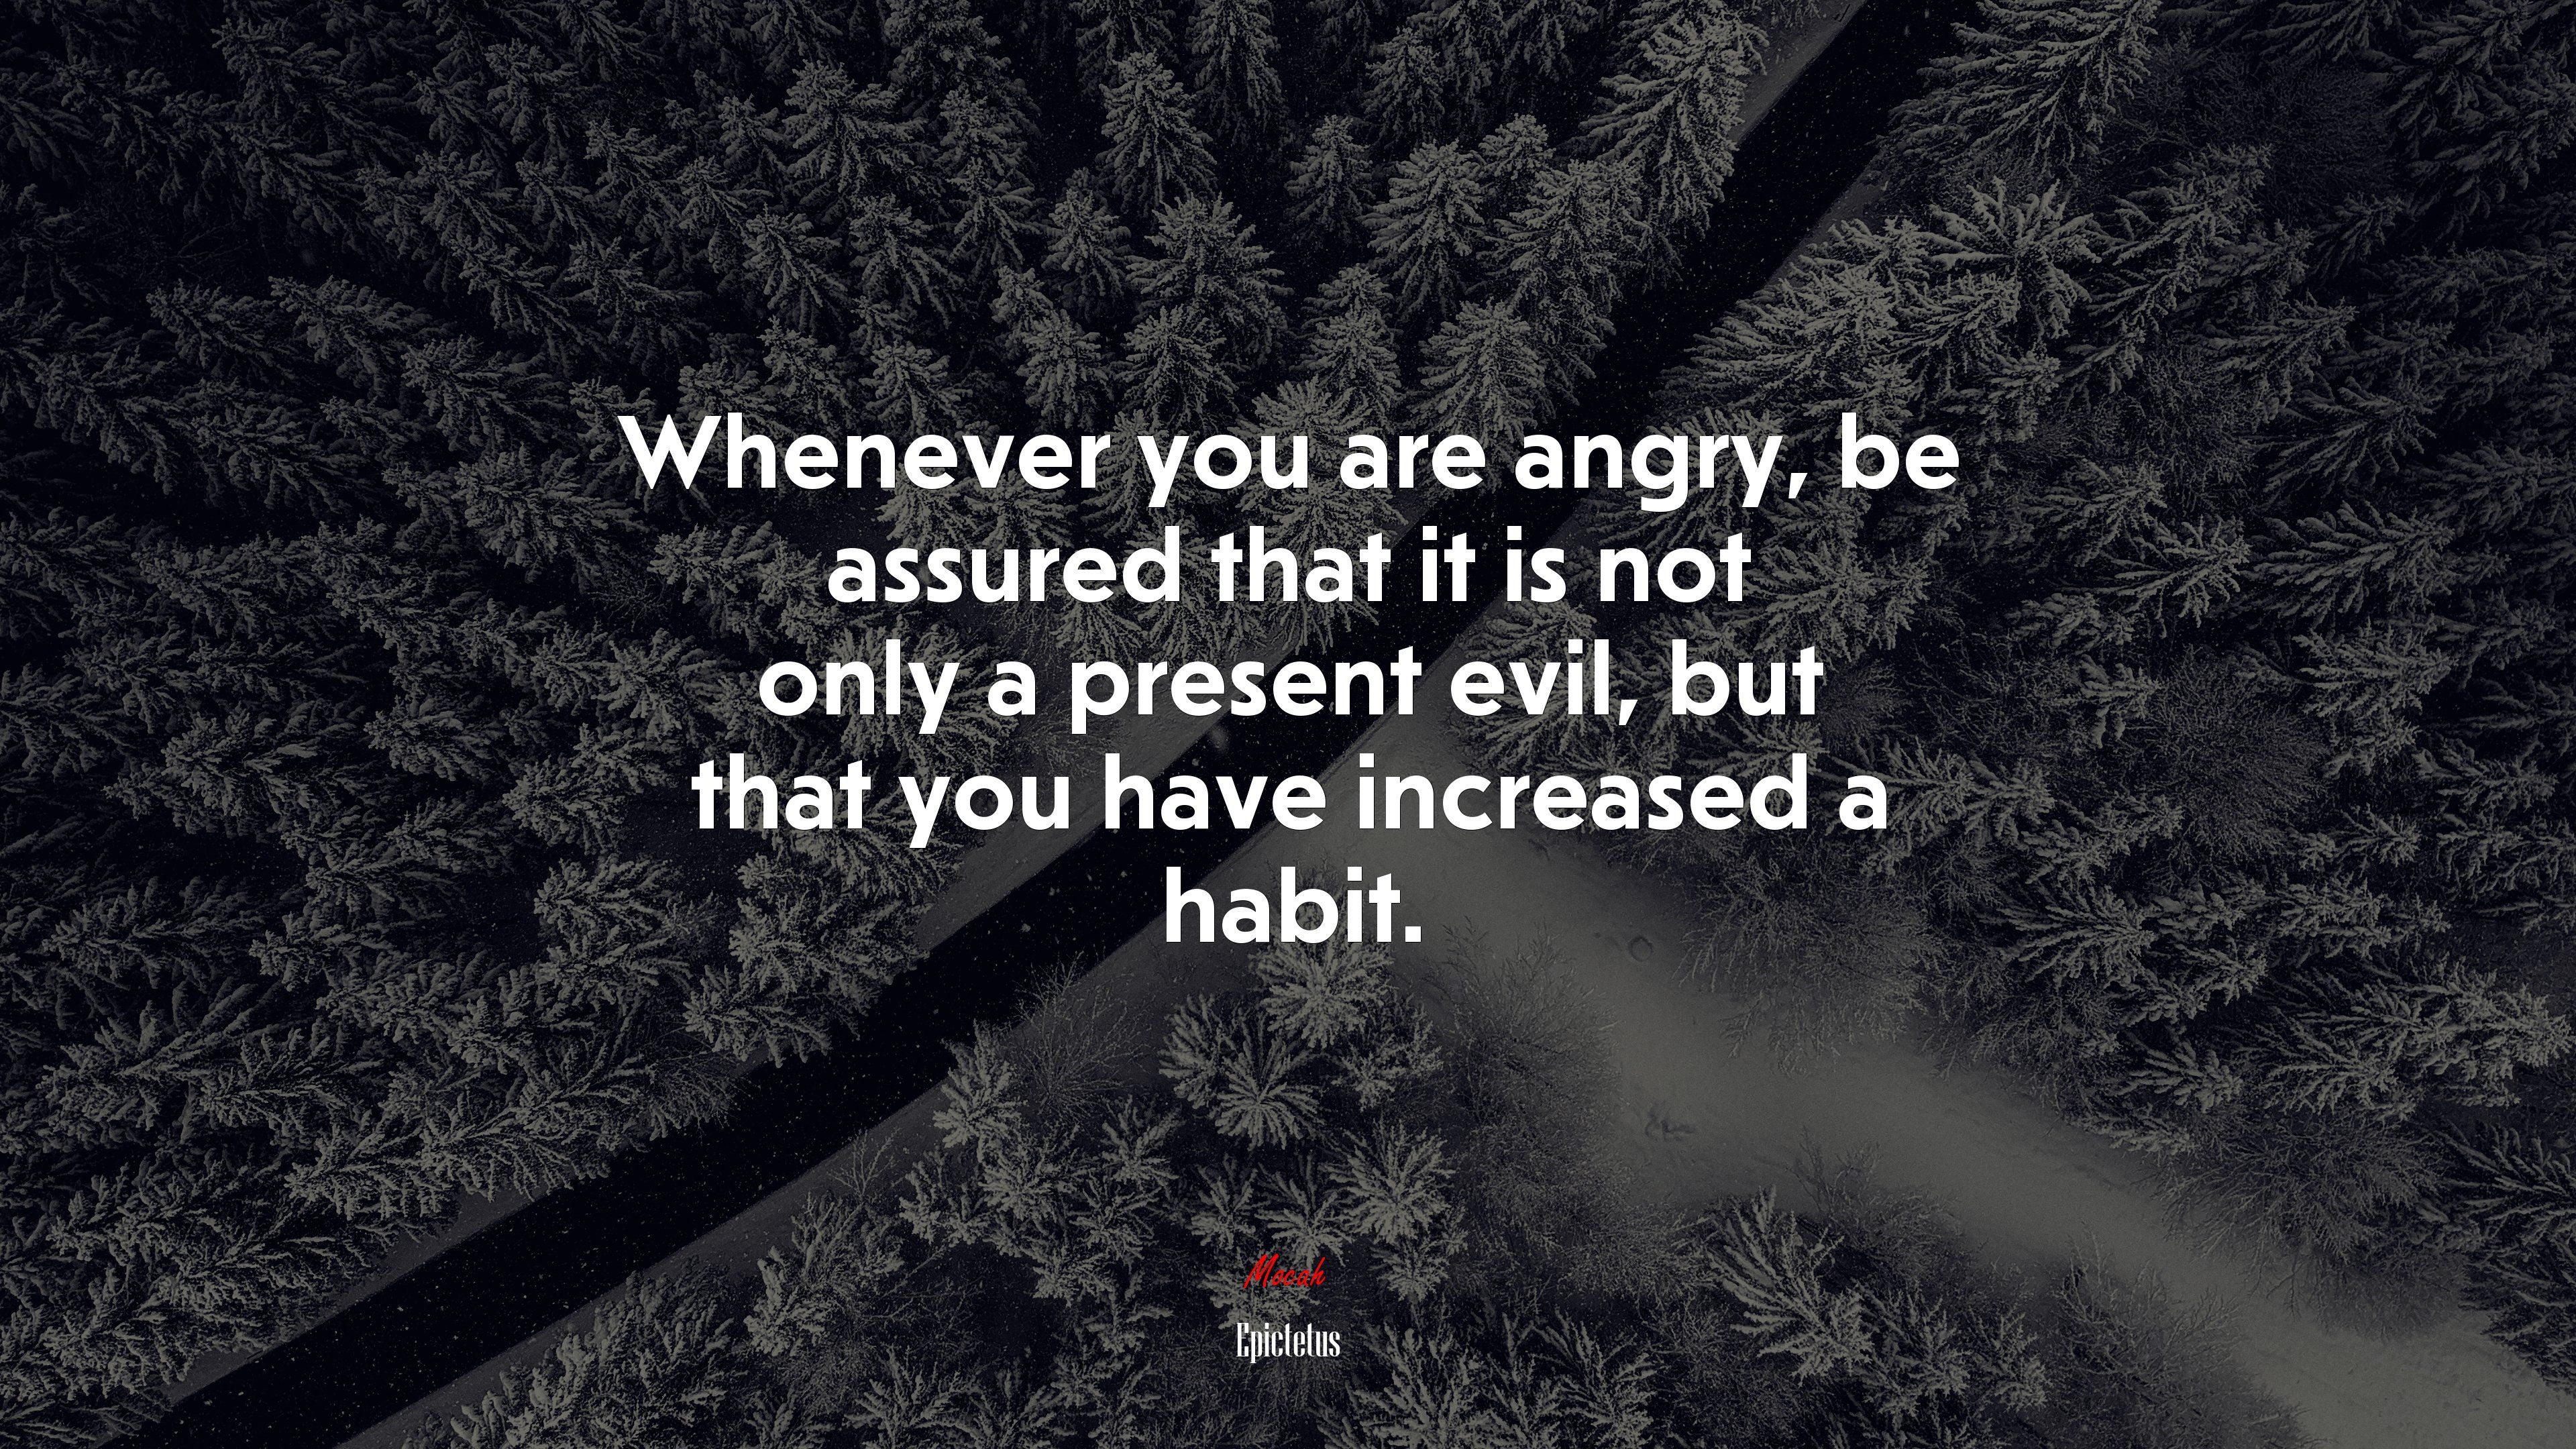 Whenever you are angry, be assured that it is not only a present evil, but that you have increased a habit. Epictetus quote, 4k wallpaper. Mocah HD Wallpaper